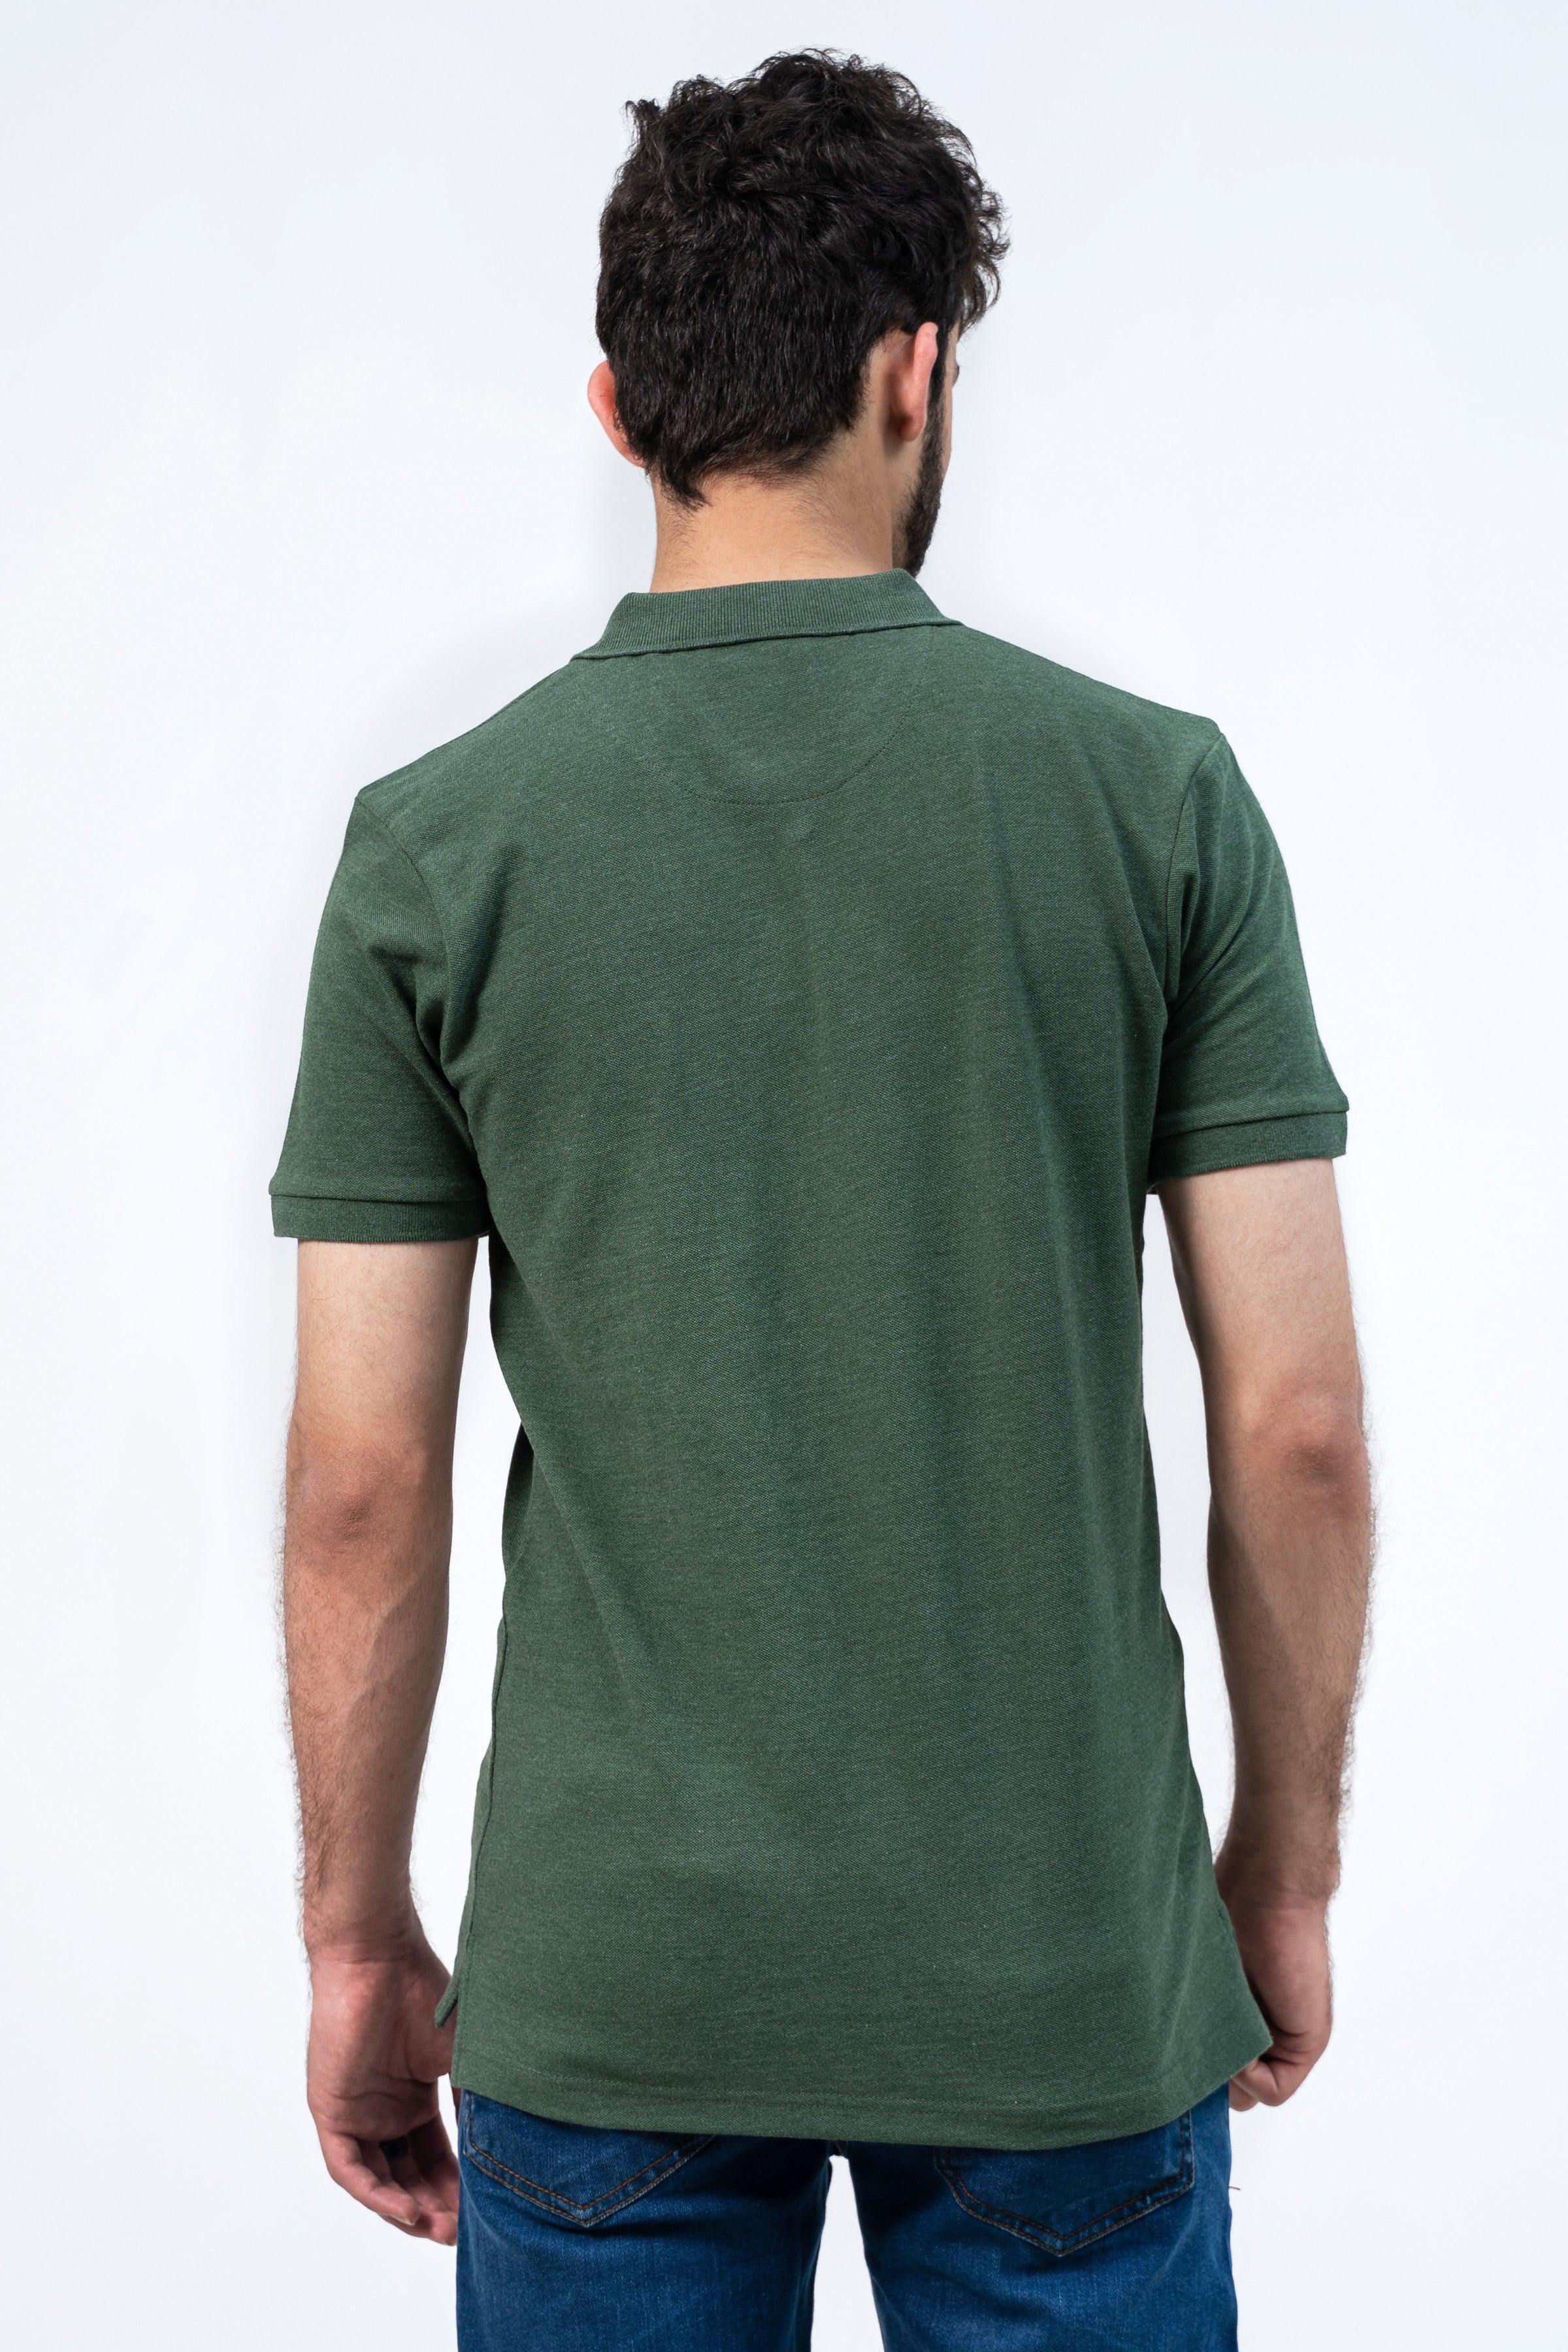 CLASSIC GREEN POLO at Charcoal Clothing